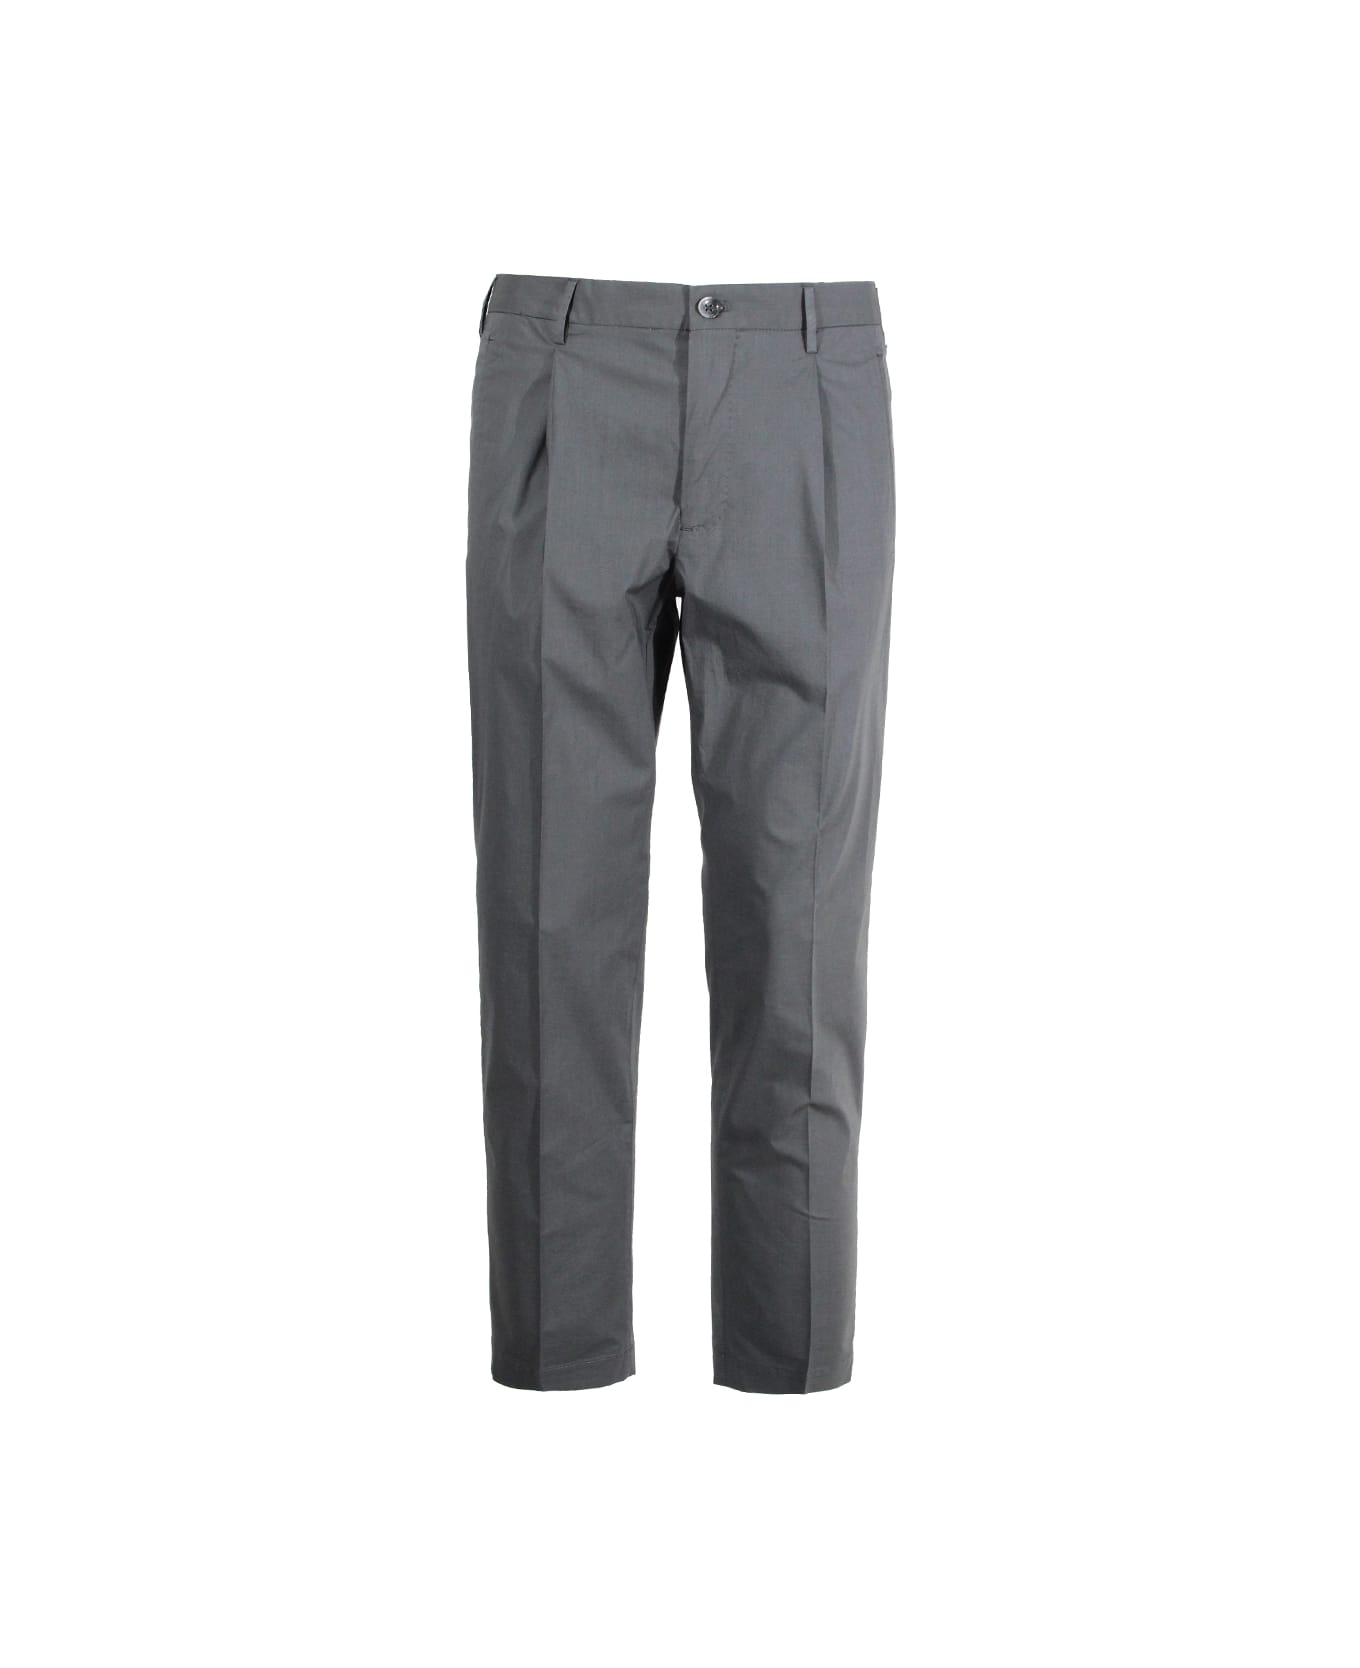 Incotex Trousers With Pleats - Grey ボトムス